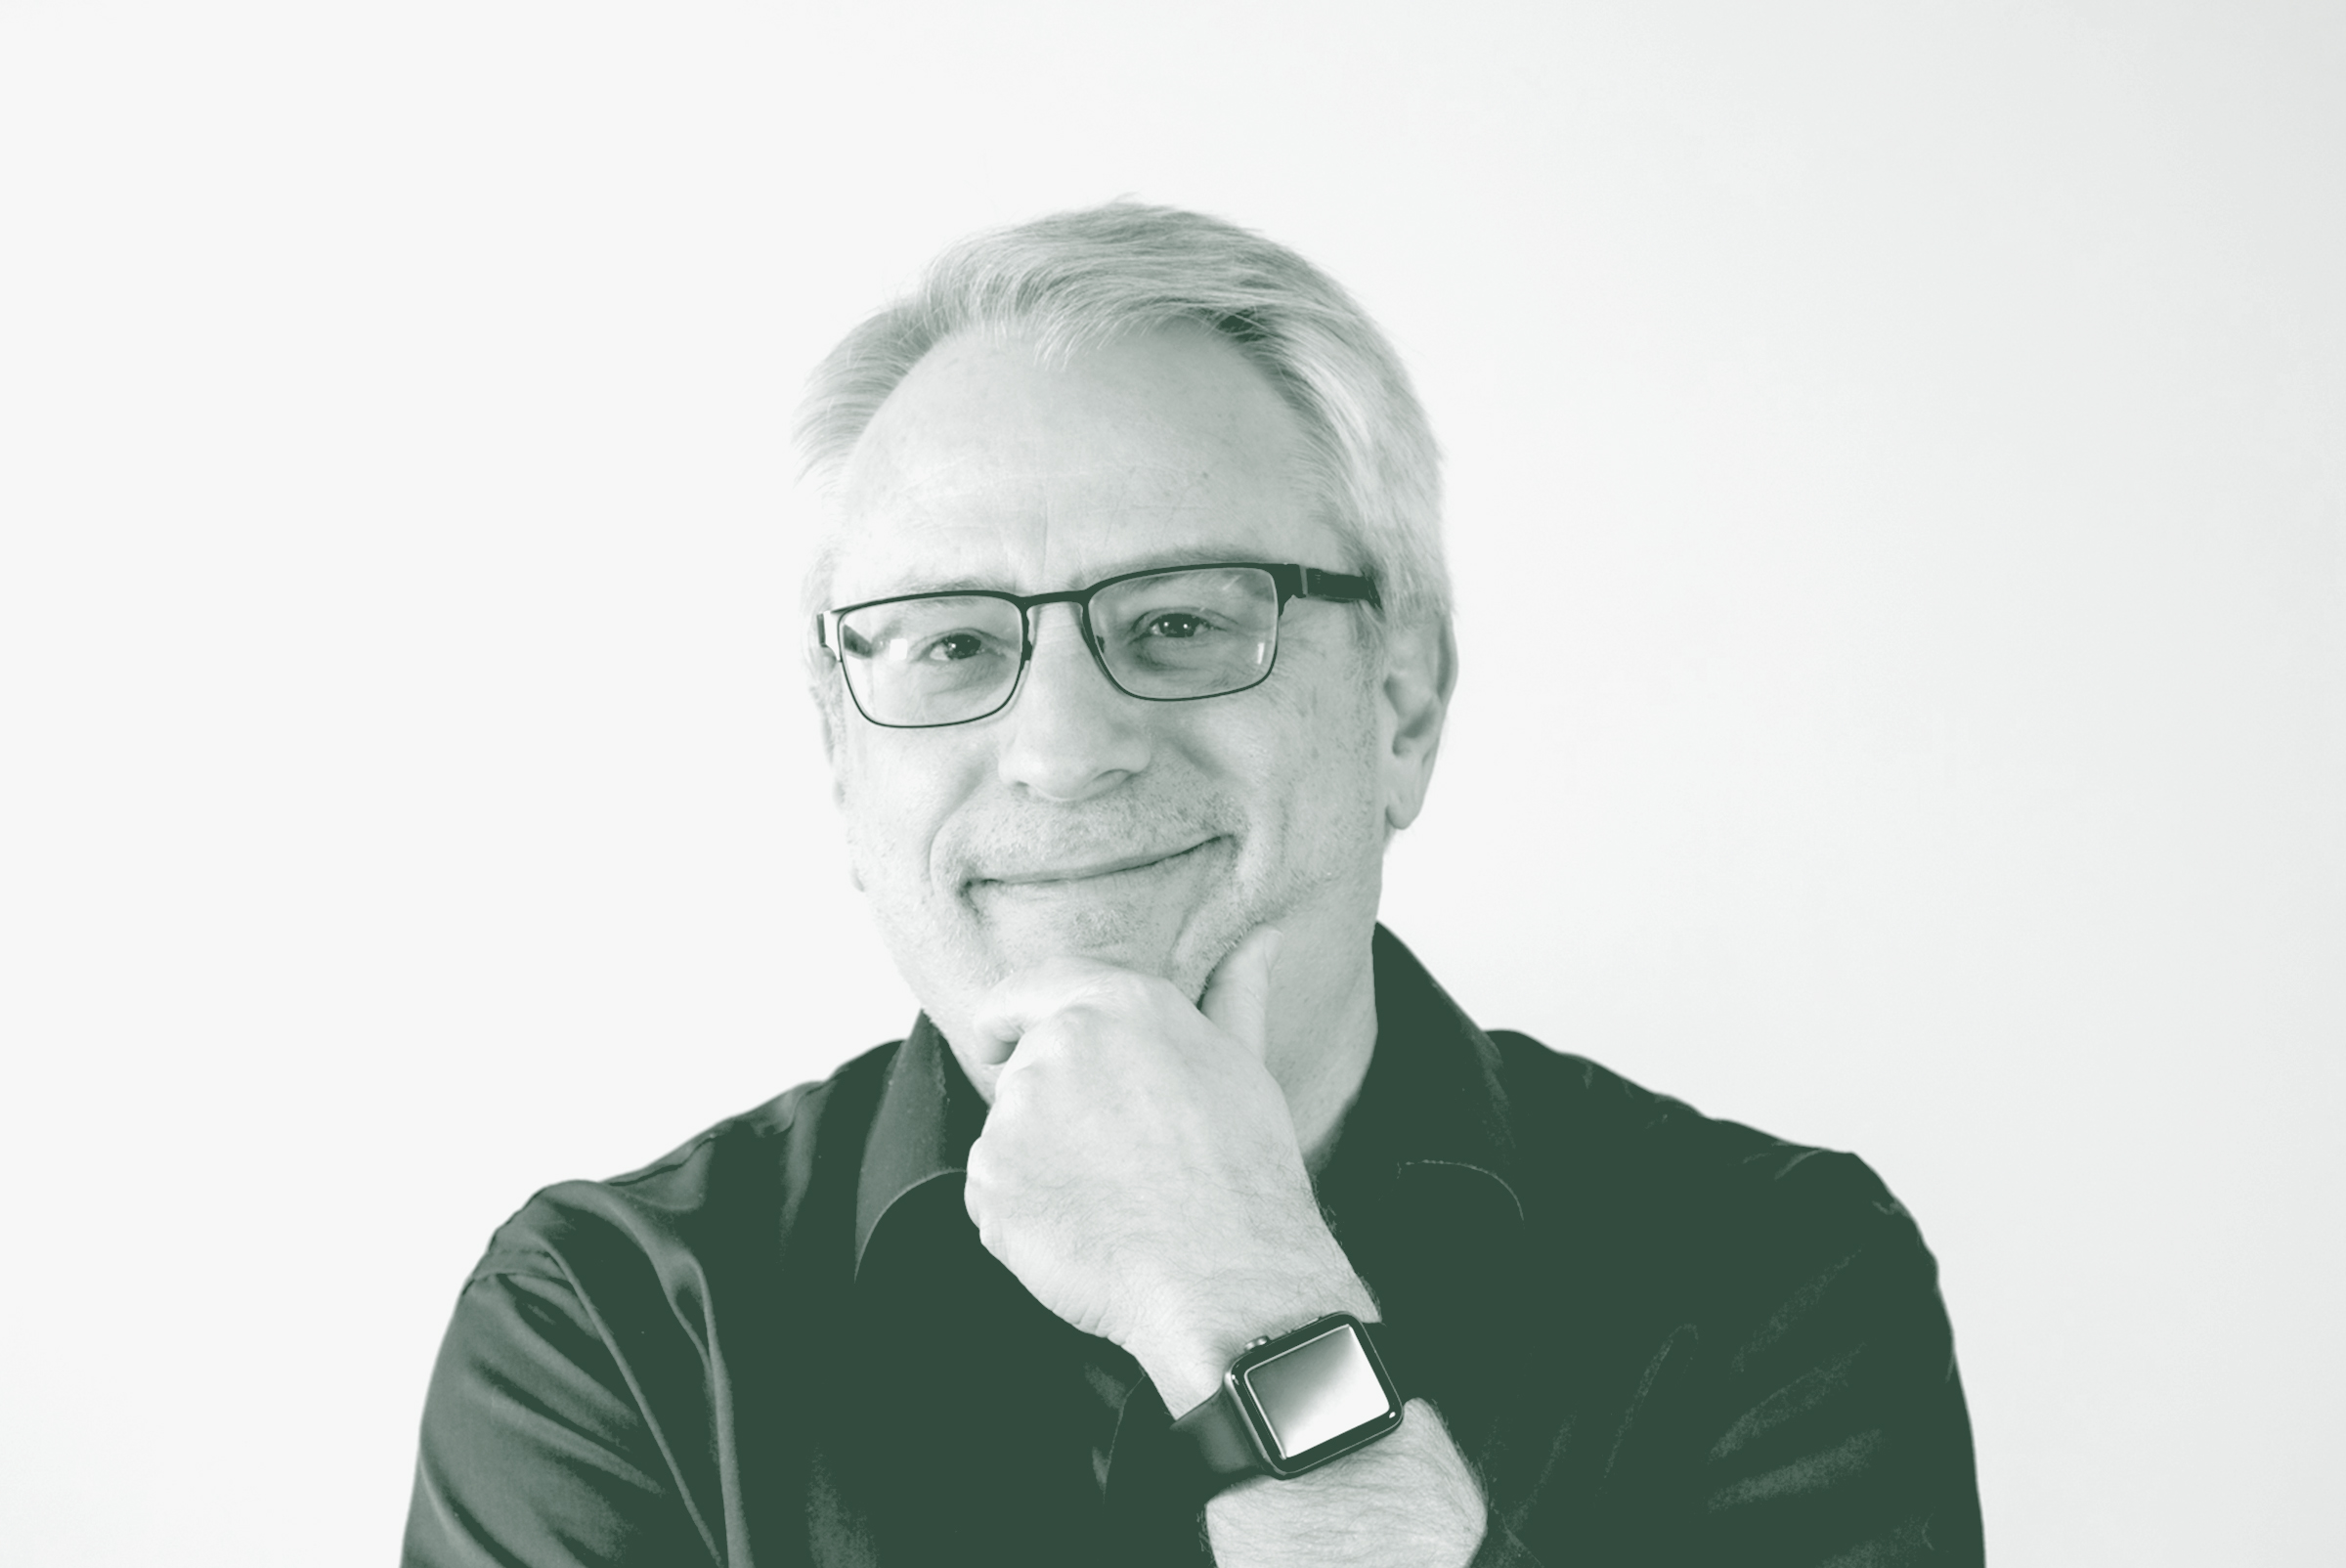 A black and white portrait of Lonnie Burns, an Associate Principal and Studio Director with GFF in the Fort Worth Studio, in front of a white background.